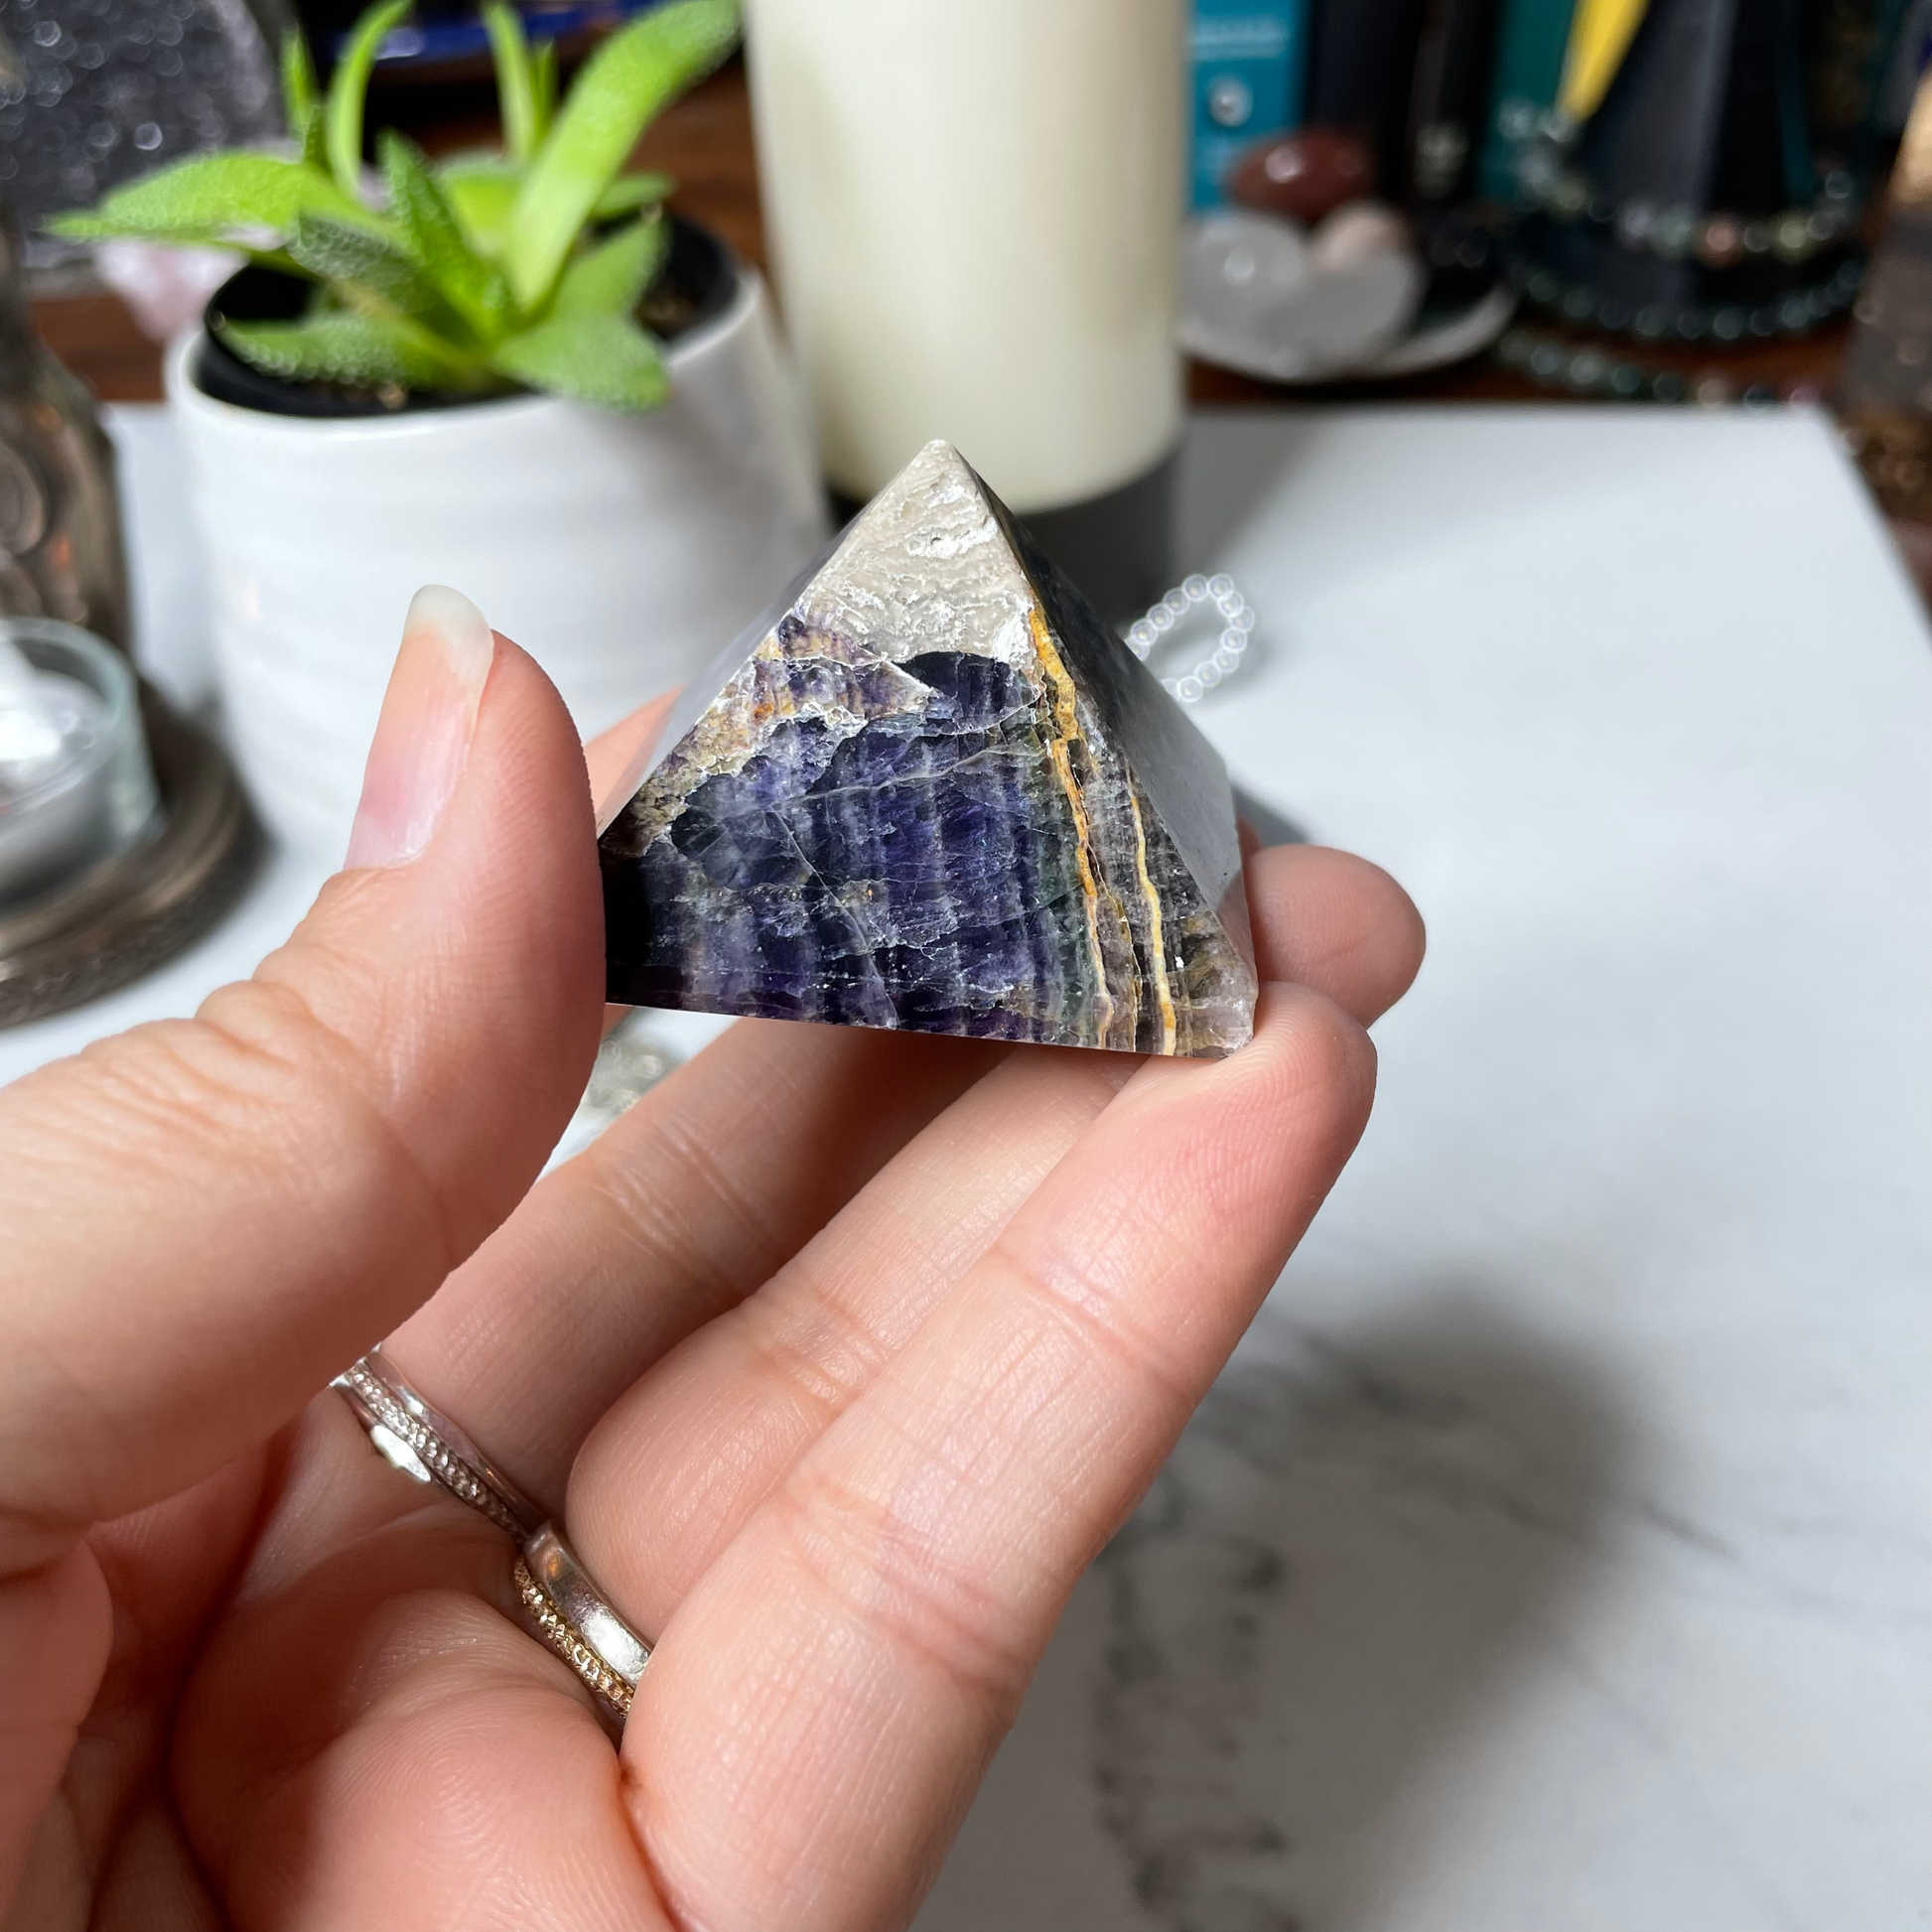 Freya's Haven | Metaphysical & Crystal shop | A close up photo of  a Rainbow Fluorite pyramid held in a woman's hand with candles in the background.